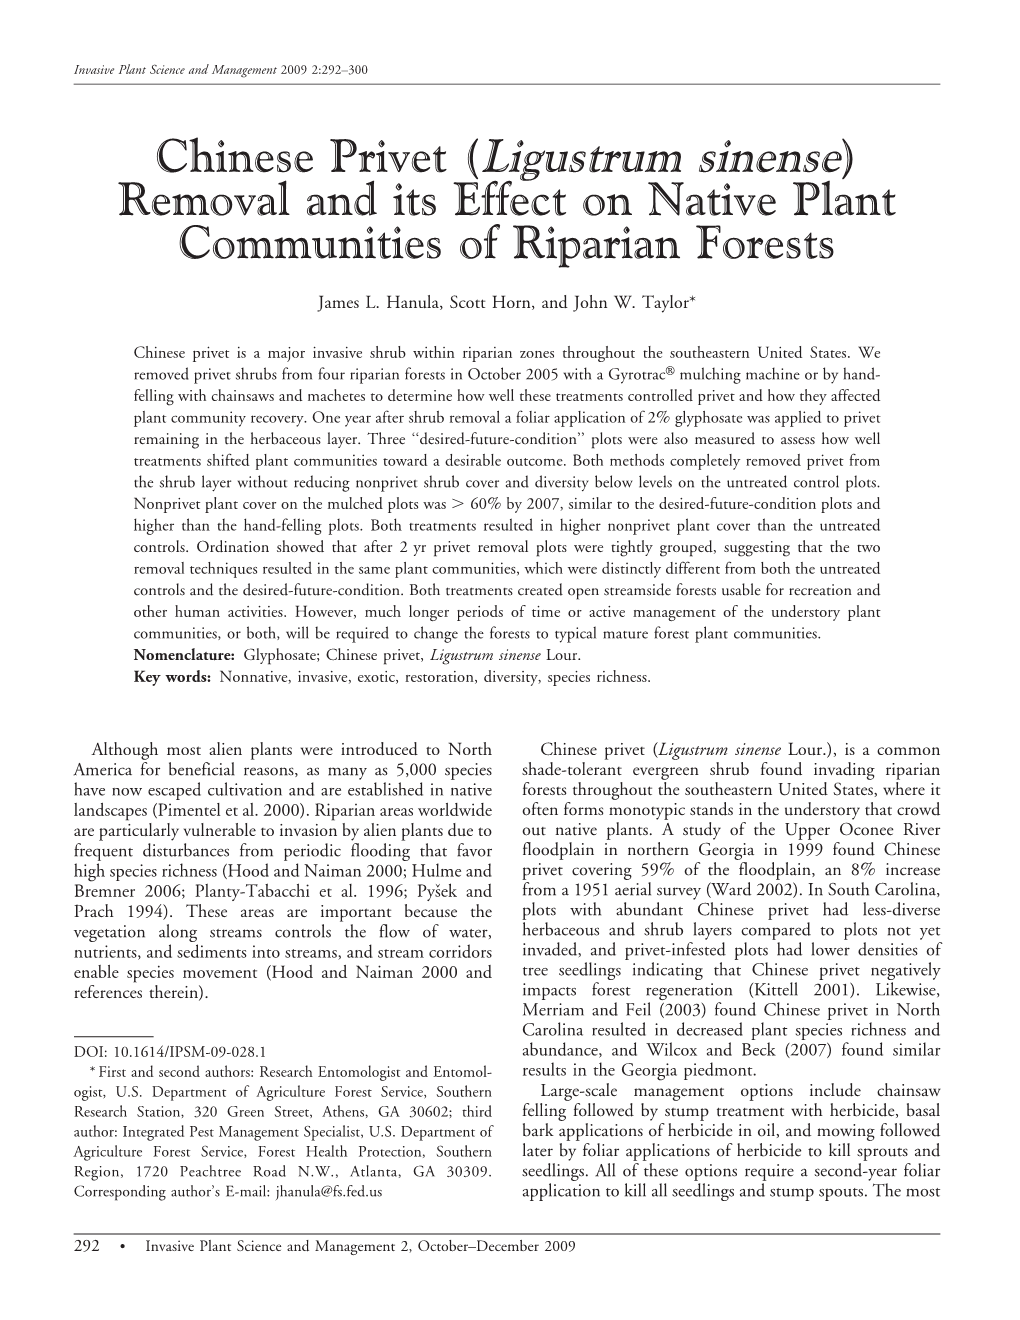 Chinese Privet (Ligustrum Sinense) Removal and Its Effect on Native Plant Communities of Riparian Forests